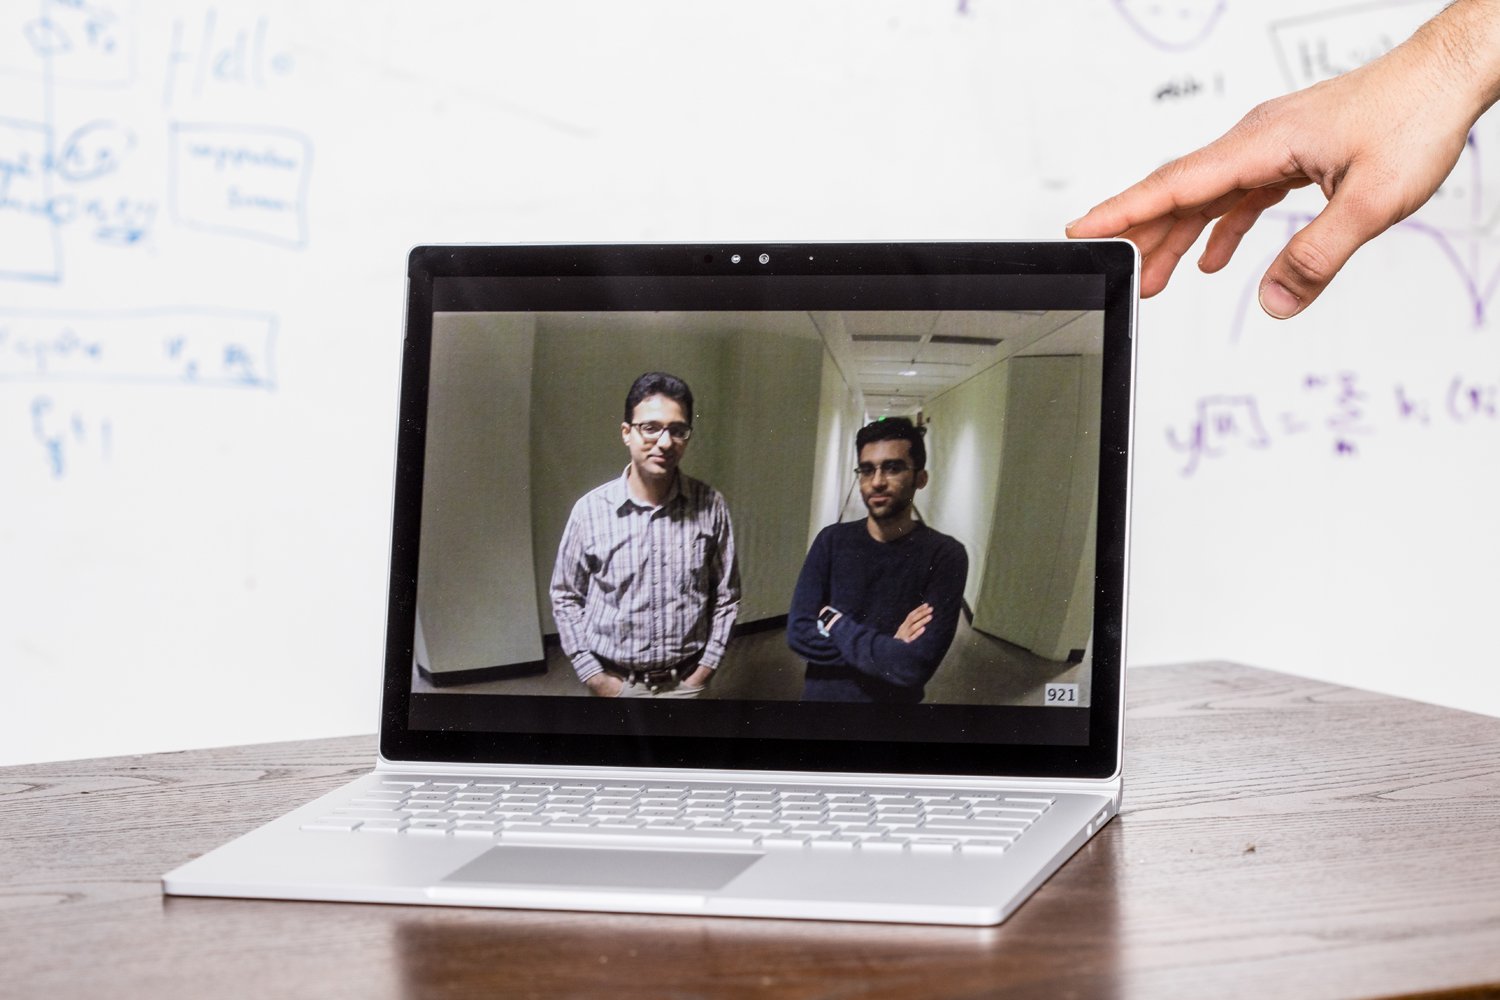 The UW team’s low-power prototype can stream 720p HD videos at 10 frames per second to a device, like a laptop, up to 14 feet away.Dennis Wise/University of Washington